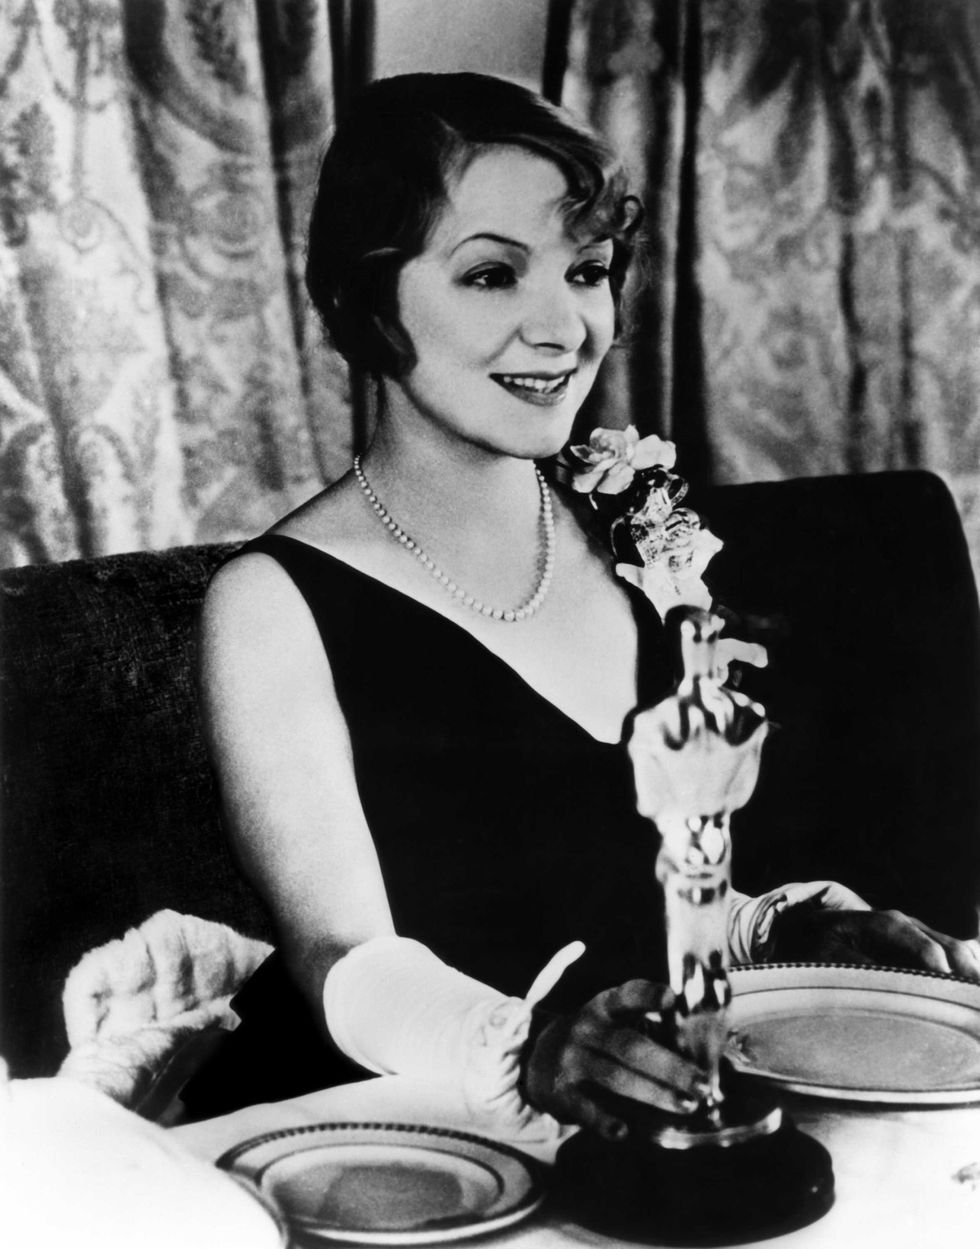 <p>Helen Hayes displays her Best Actress award, earned for <i data-redactor-tag="i">The Sin of Madelon Claudet</i><i data-redactor-tag="i">.</i> In the course of her long career,<i data-redactor-tag="i"> </i>Hayes won an Emmy, a Grammy, an Oscar, and a Tony, an achievement only 12 people to date can claim.<span class="redactor-invisible-space" data-verified="redactor" data-redactor-tag="span" data-redactor-class="redactor-invisible-space"></span><span class="redactor-invisible-space" data-verified="redactor" data-redactor-tag="span" data-redactor-class="redactor-invisible-space"></span></p>